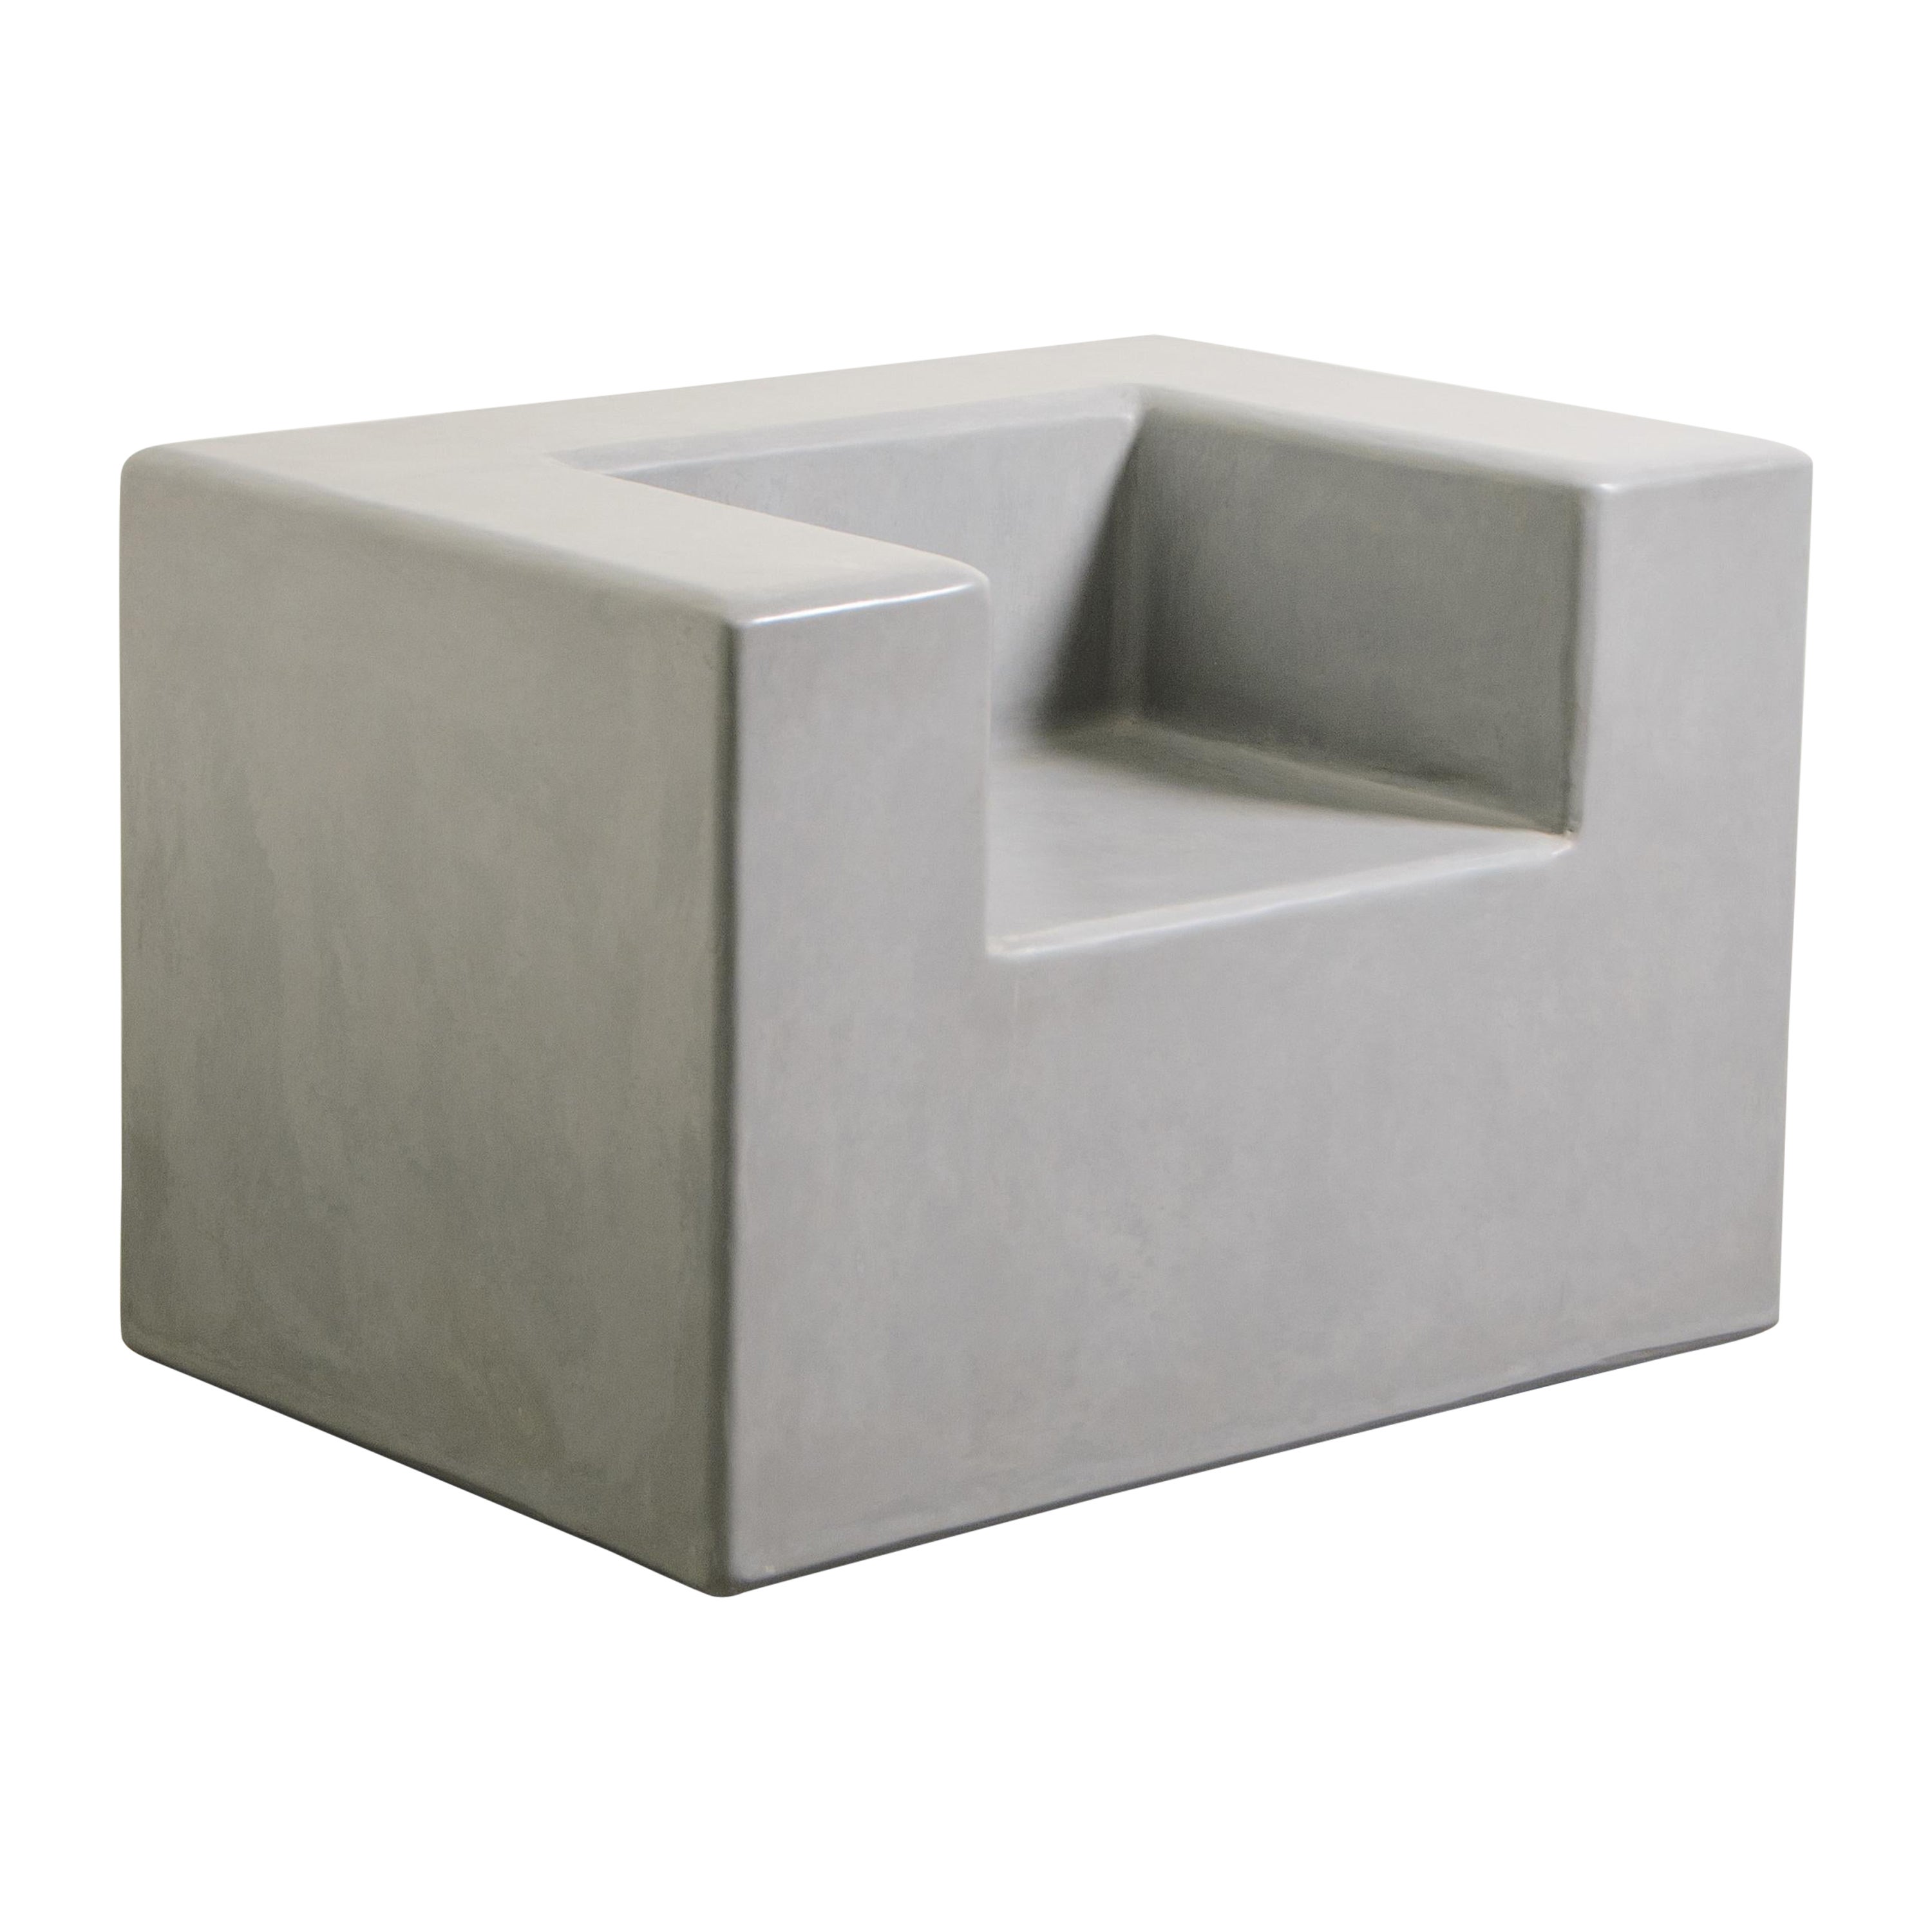 Contemporary Arm Rest Chair in Grey Lacquer by Robert Kuo, Limited Edition